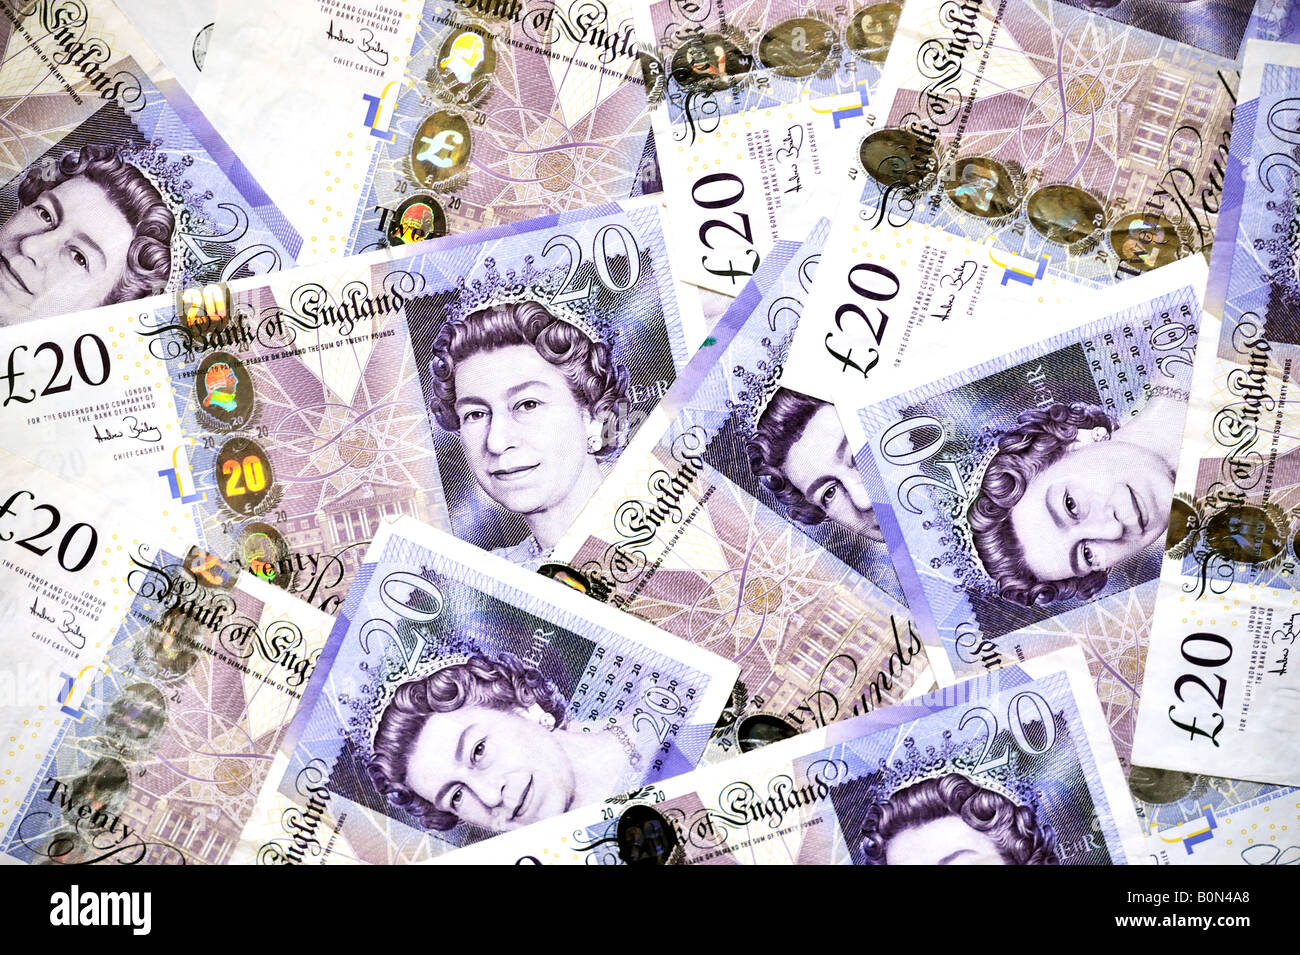 Cash money £20 bank notes currency FOR EDITORIAL USE ONLY Stock Photo